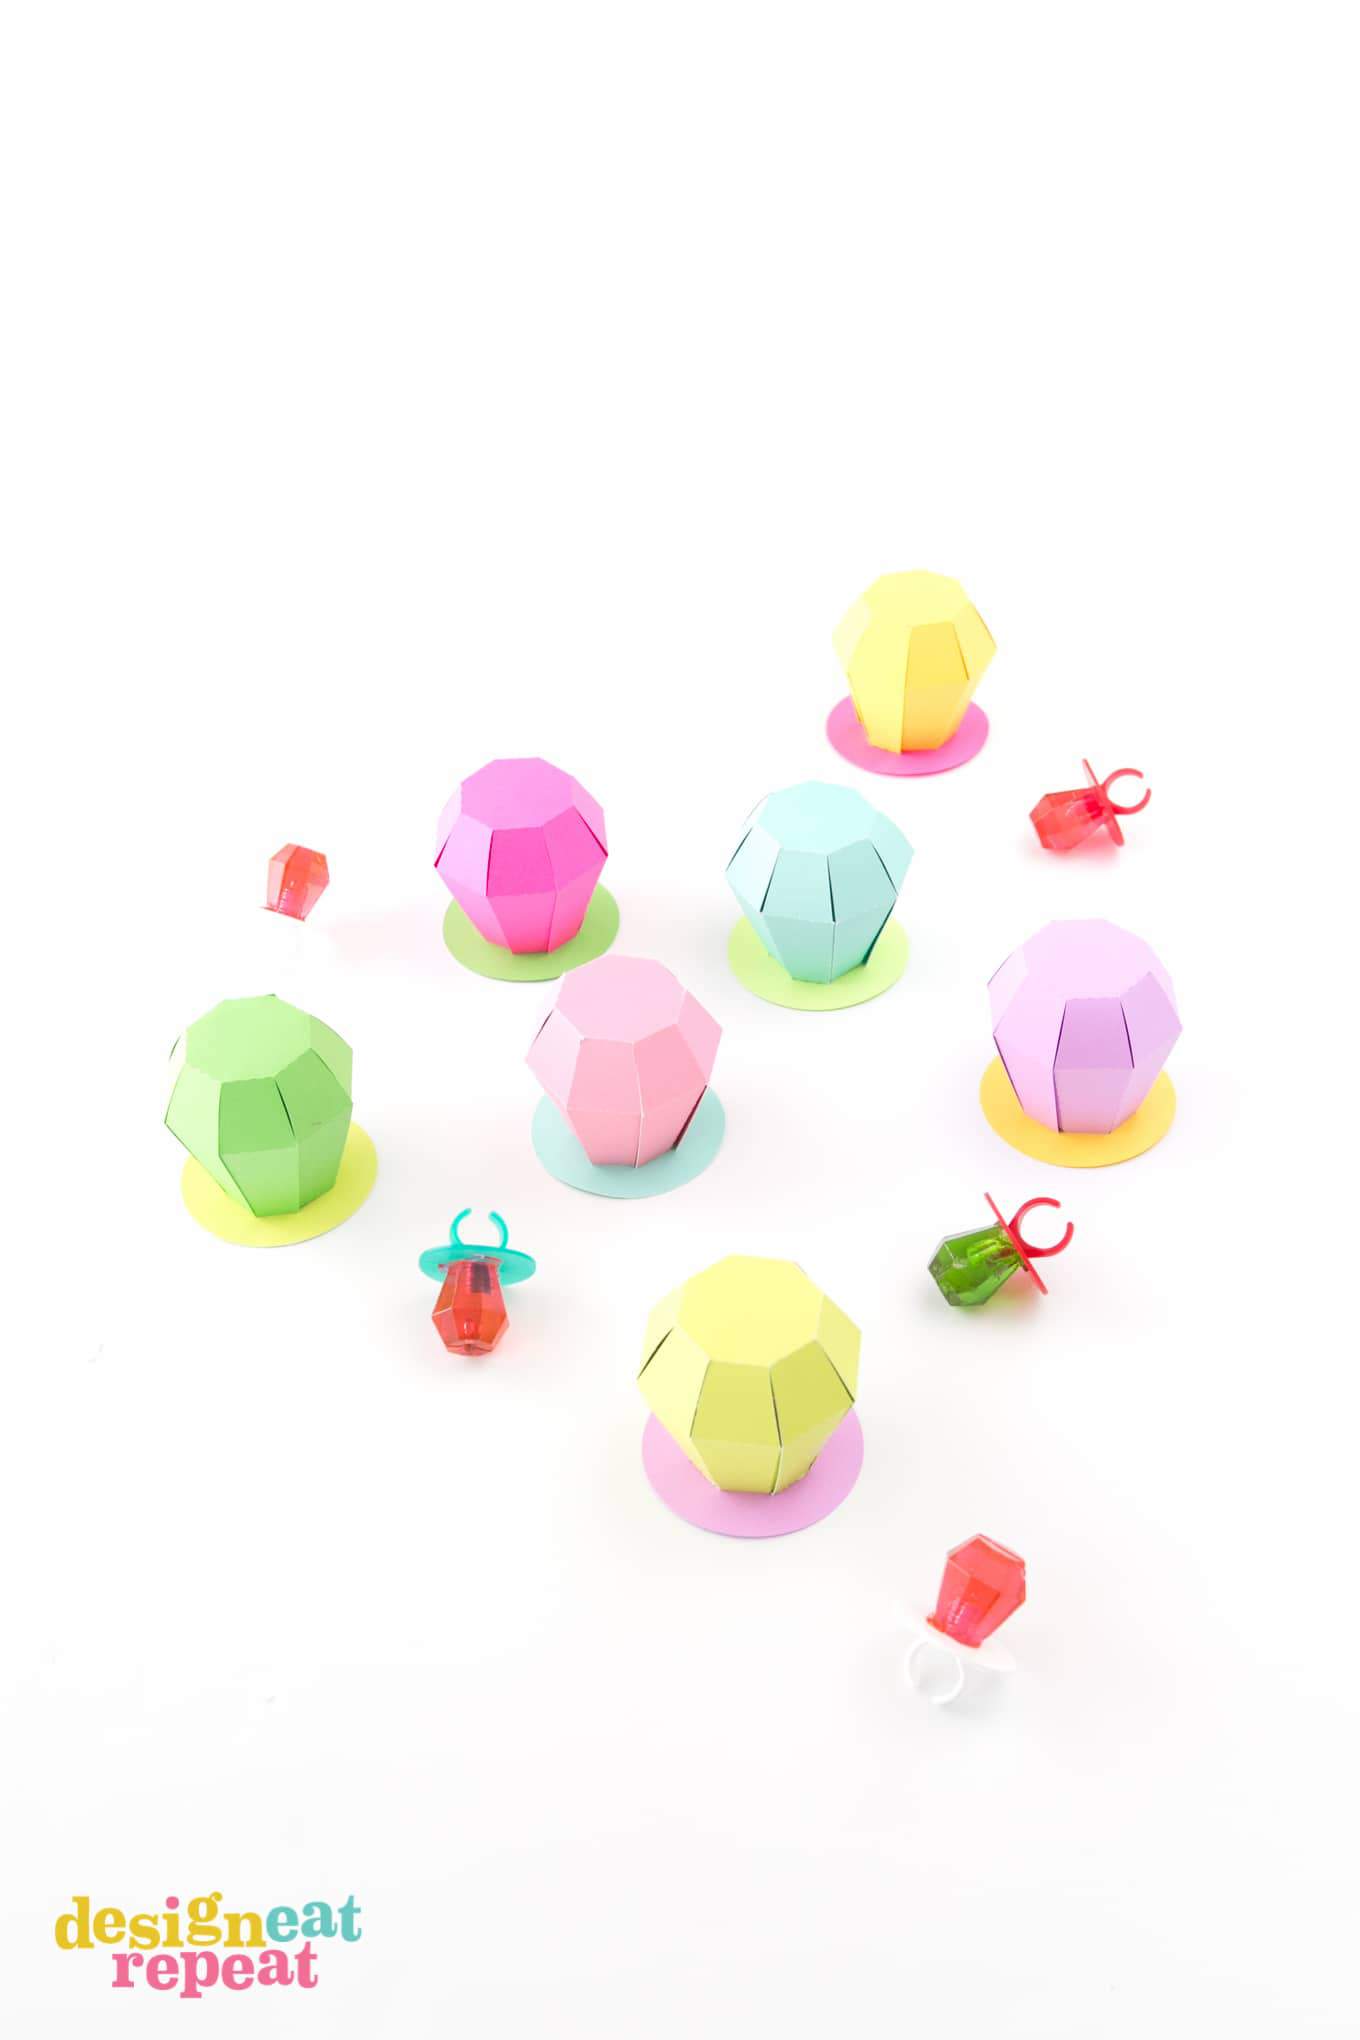 Learn how to make these paper RING POP treat boxes! Fill with candy for the perfect party favor!